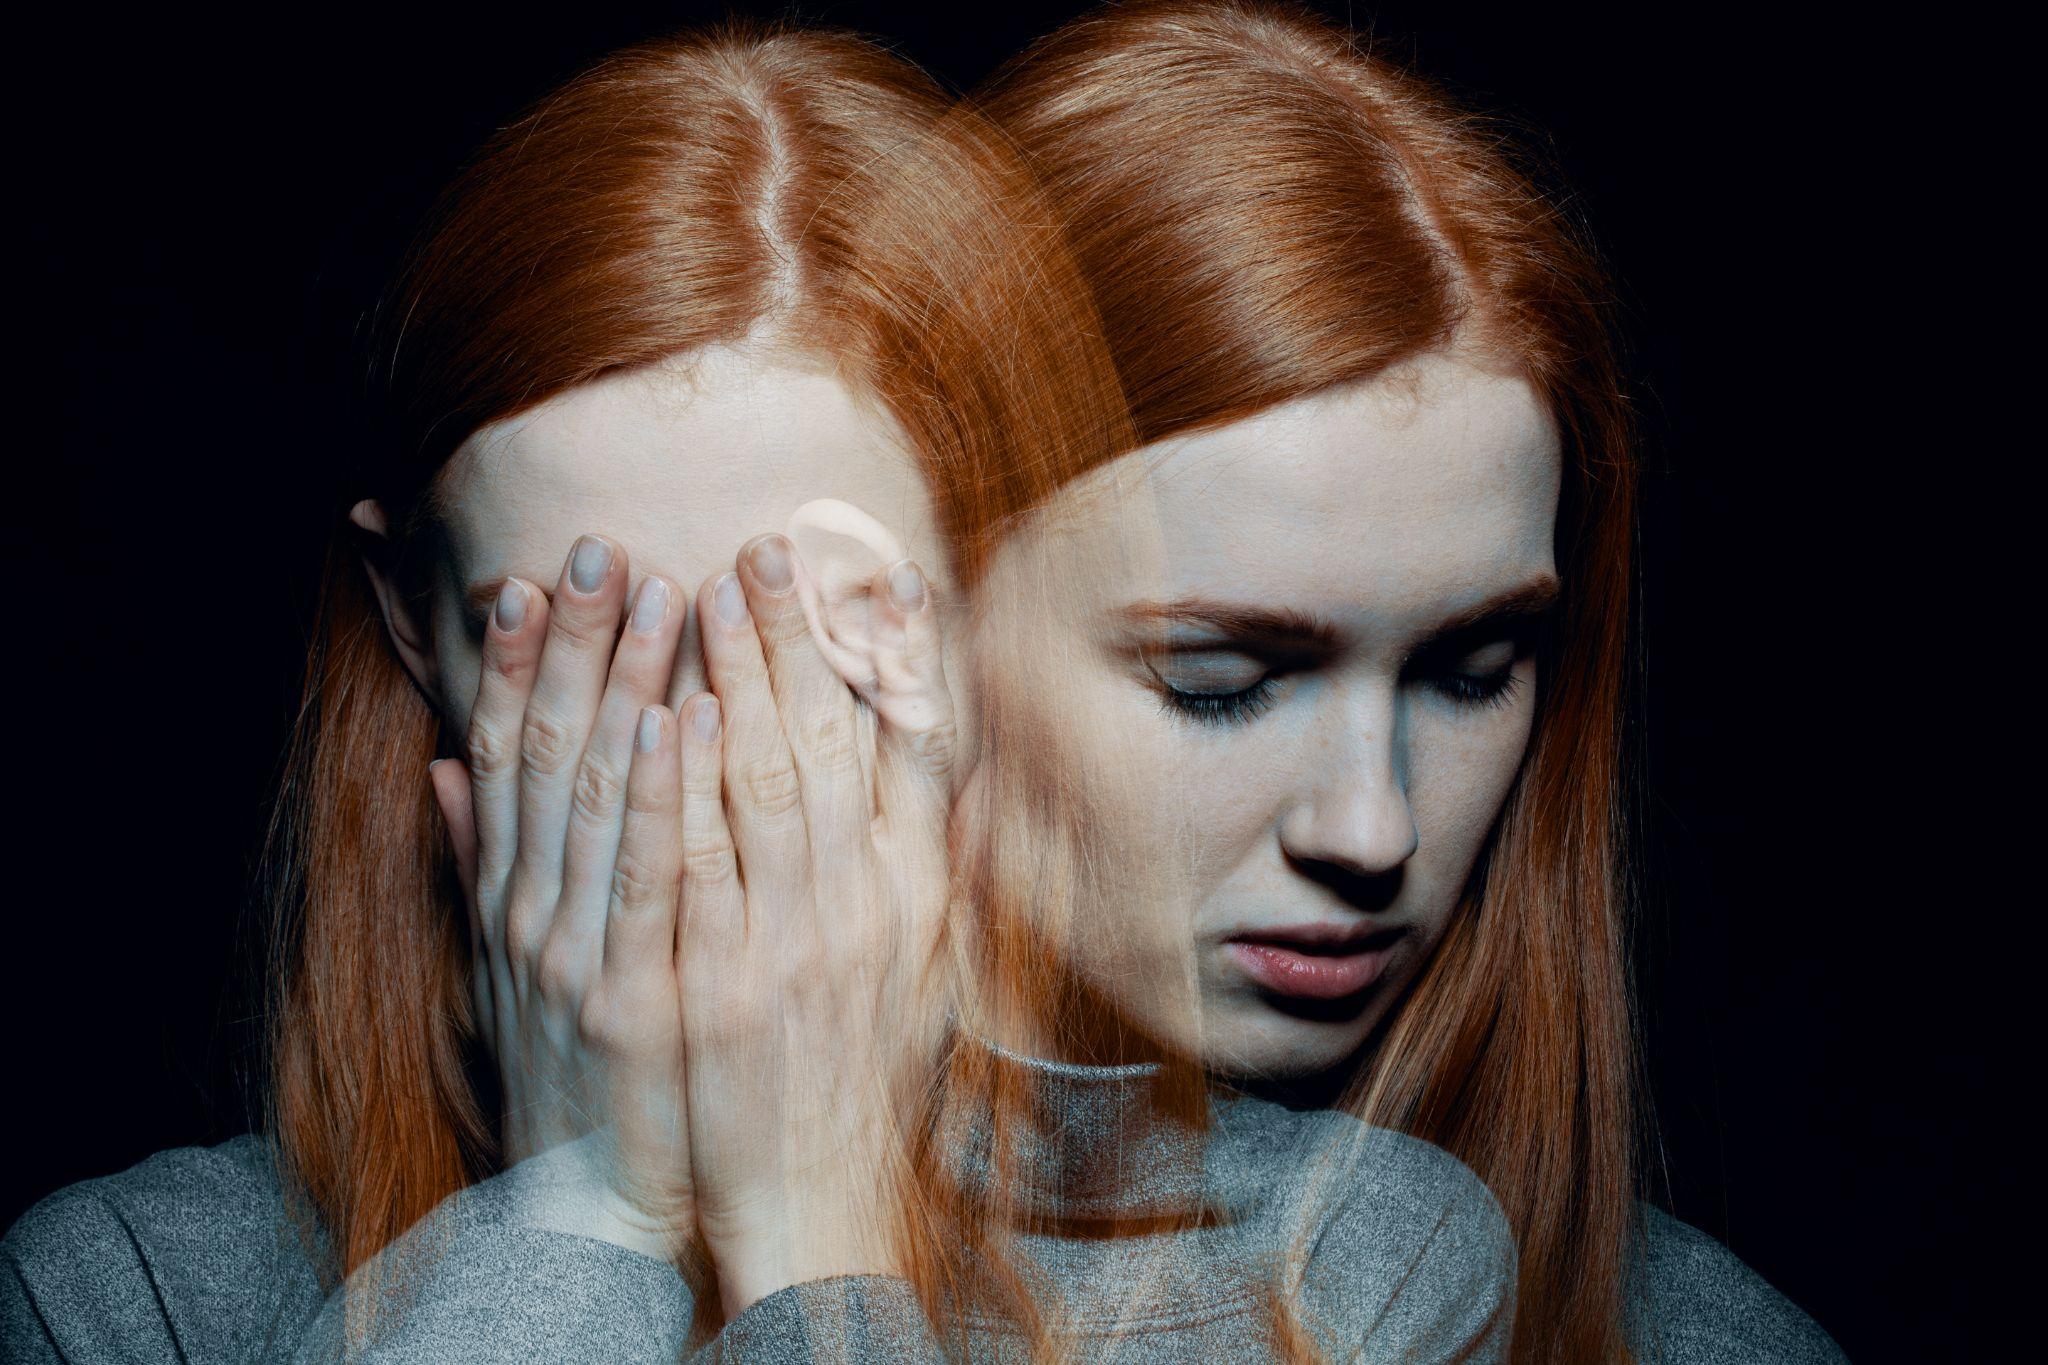 Porter of beautiful redhead girl with psychotic disorders covering her face